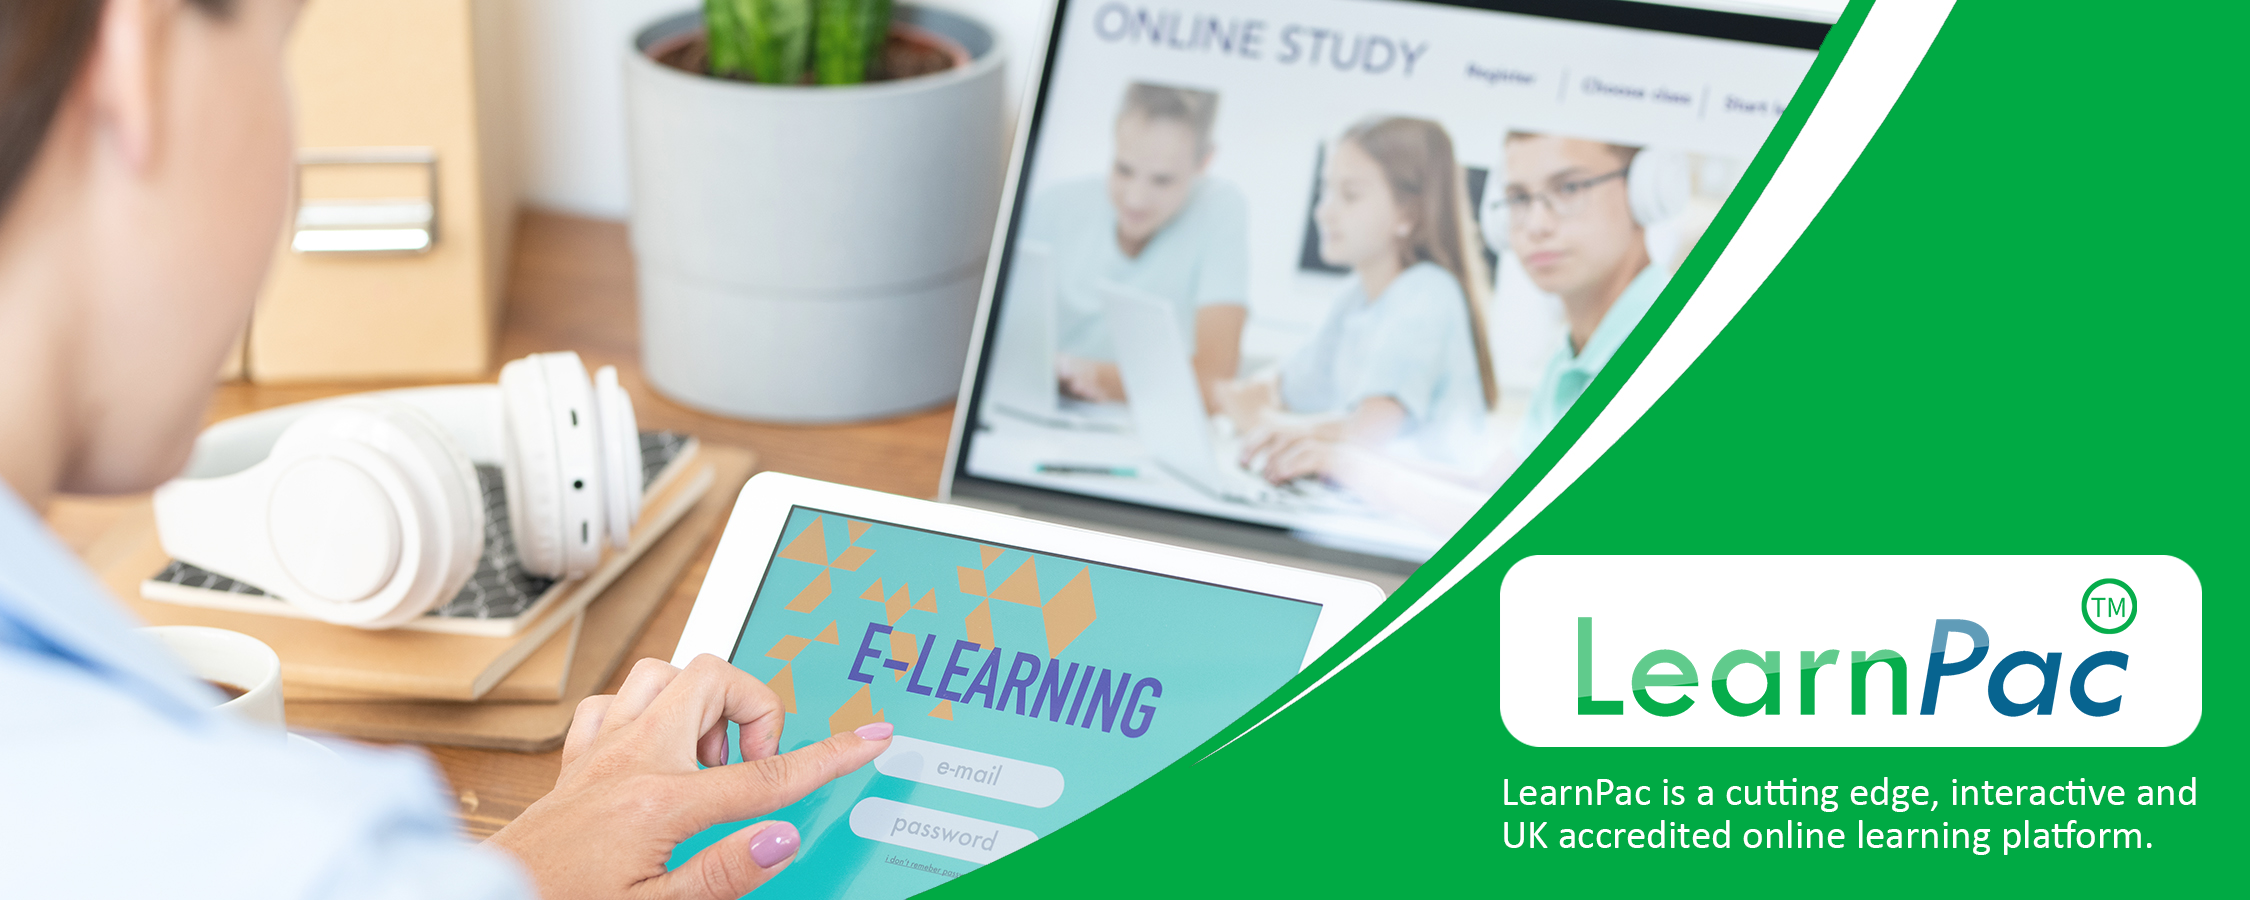 Health and Wellness at Work Training - Online Learning Courses - E-Learning Courses - LearnPac Systems UK -